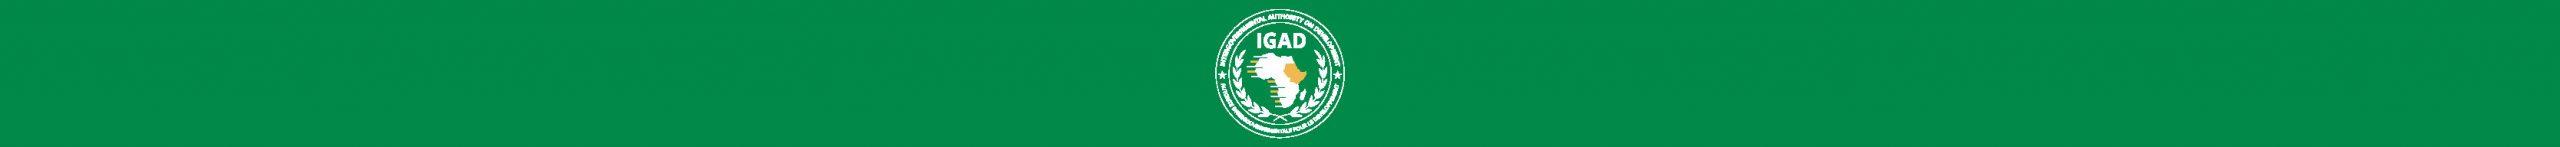 Strengthening Cooperation on Migration Management Among IGAD Countries